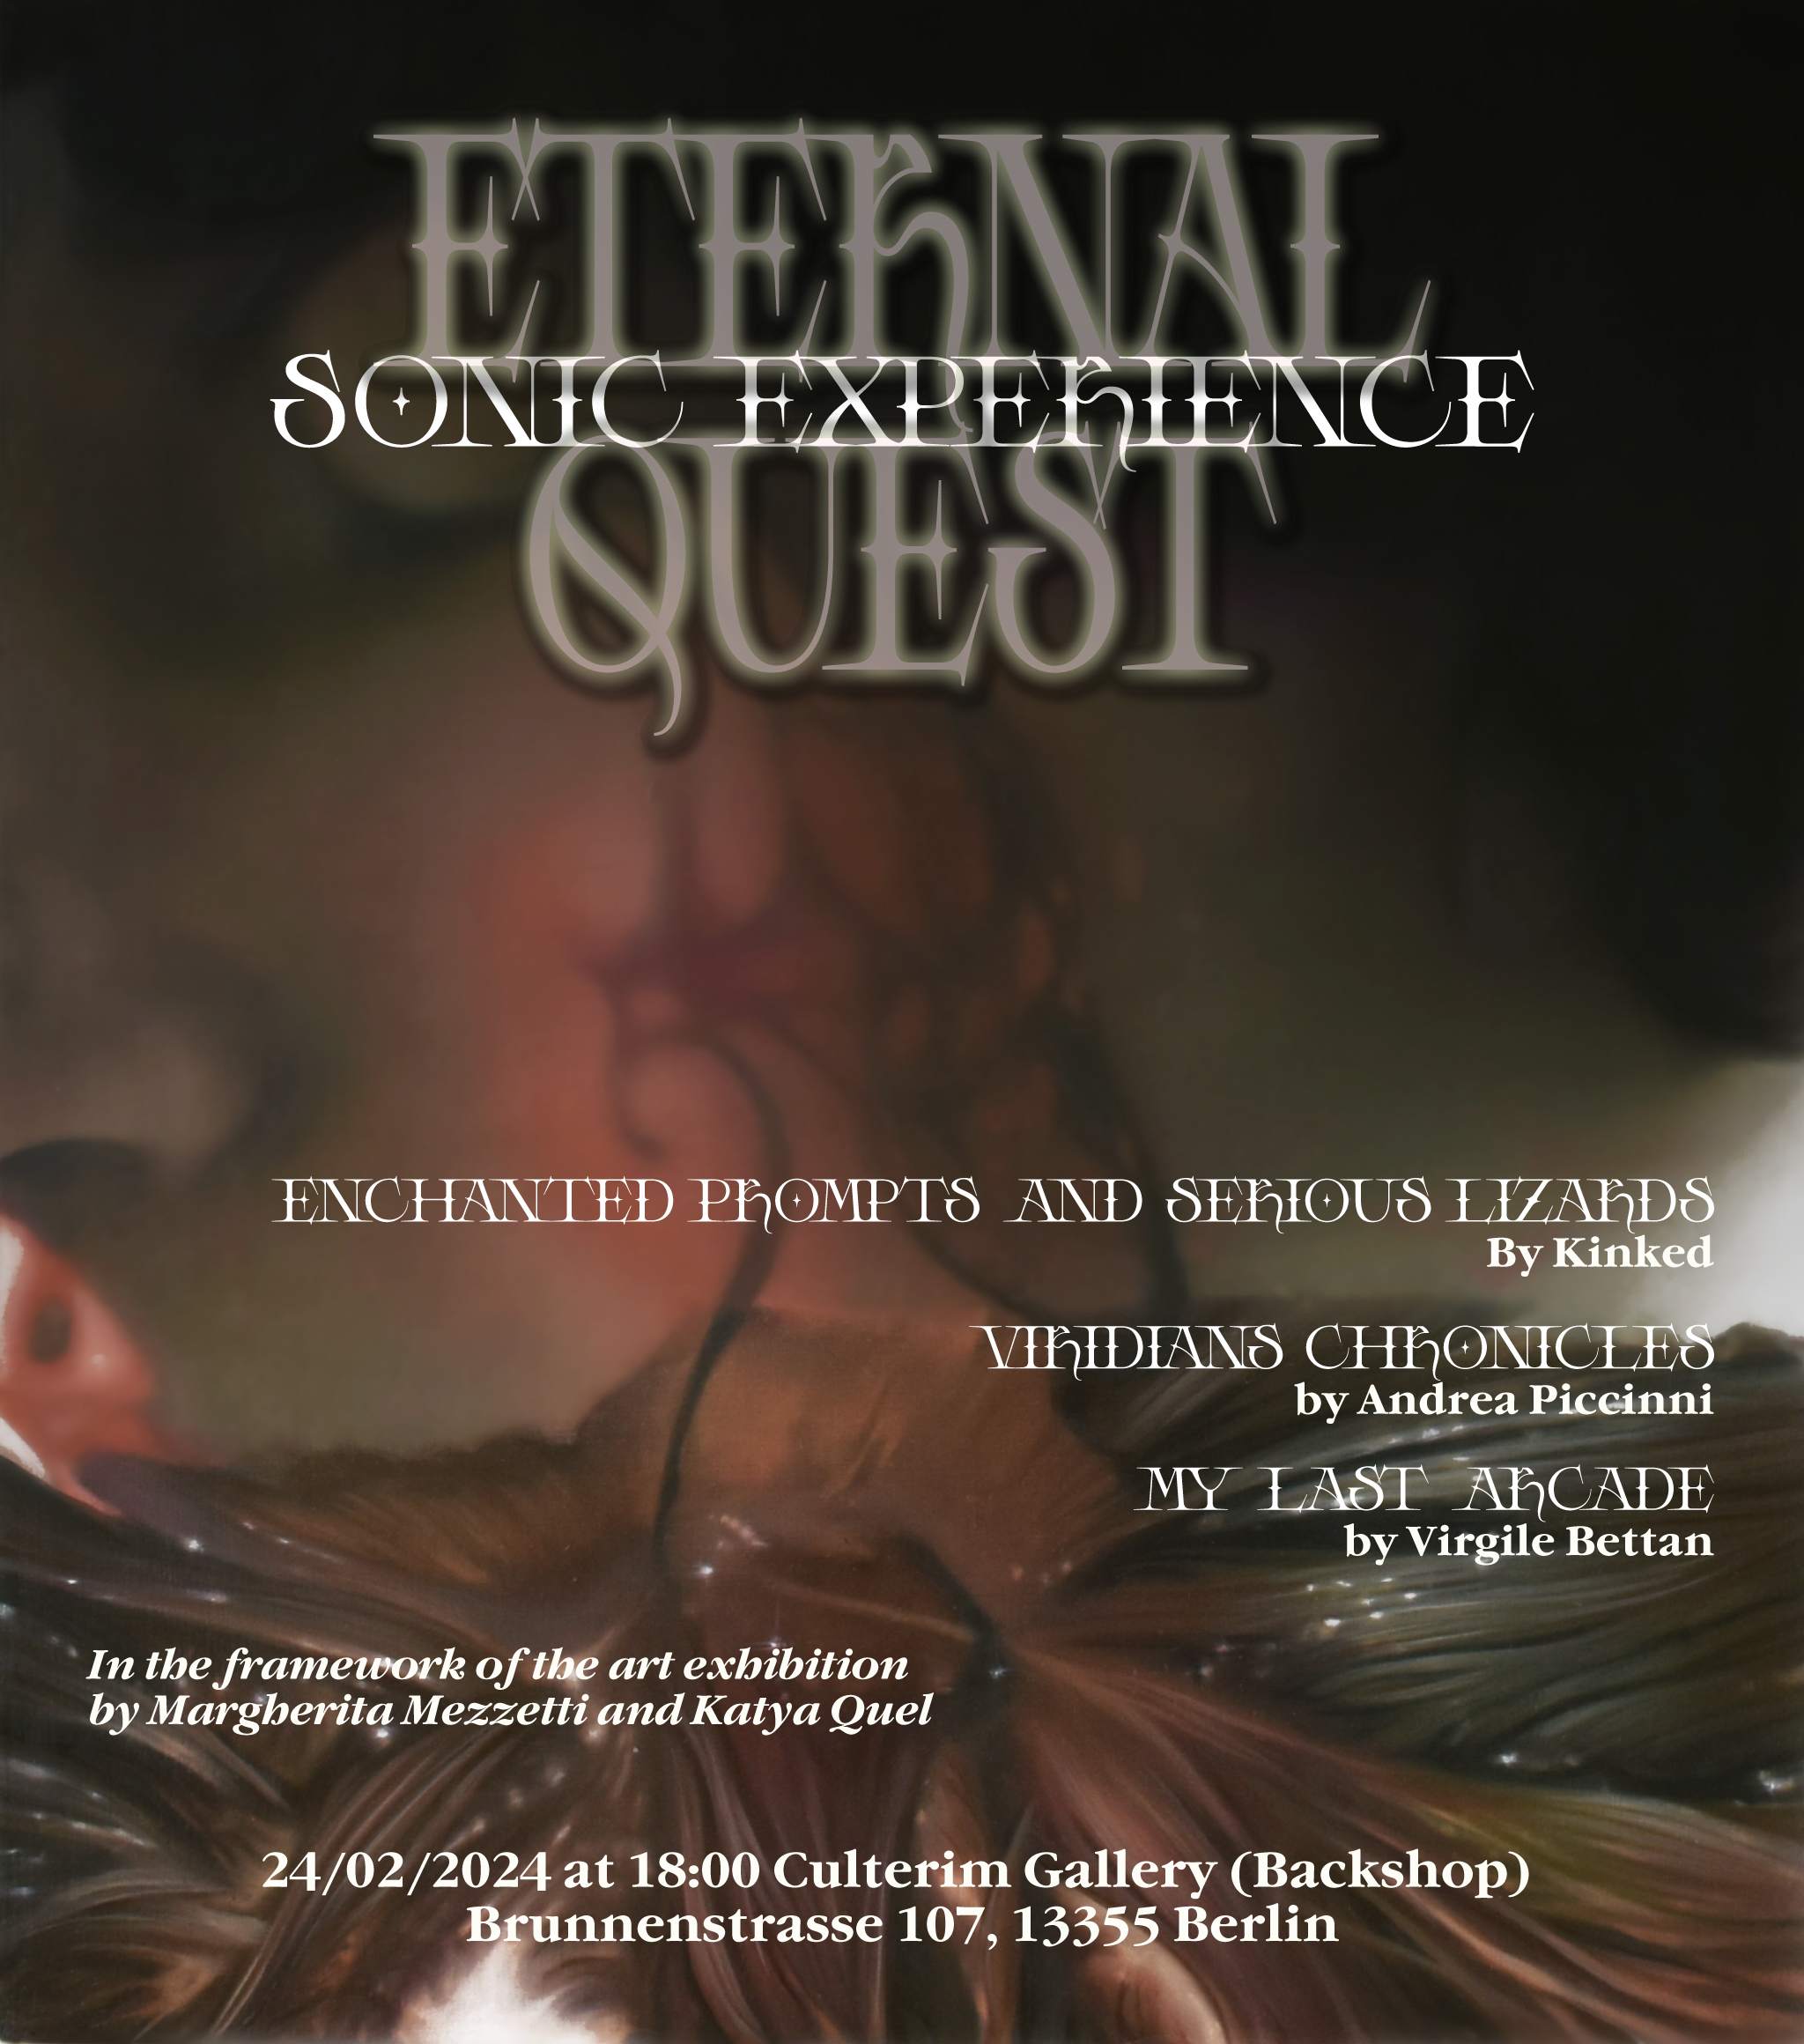 Eternal Quest Sonic Experience - Página frontal